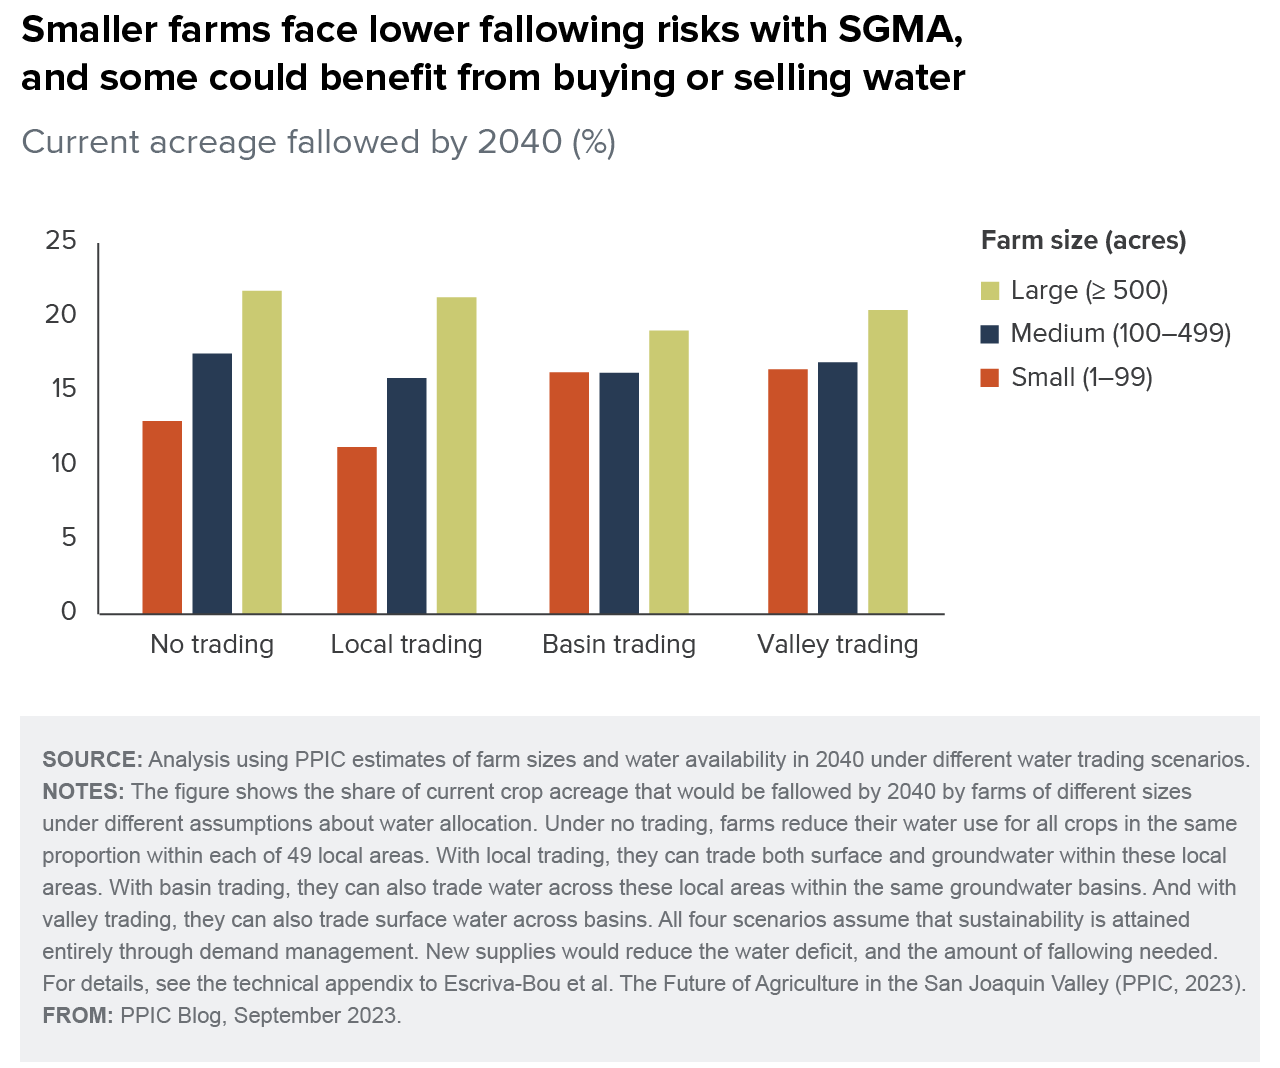 figure - Smaller farms face lower fallowing risks with SGMA, and some could benefit from buying or selling water 